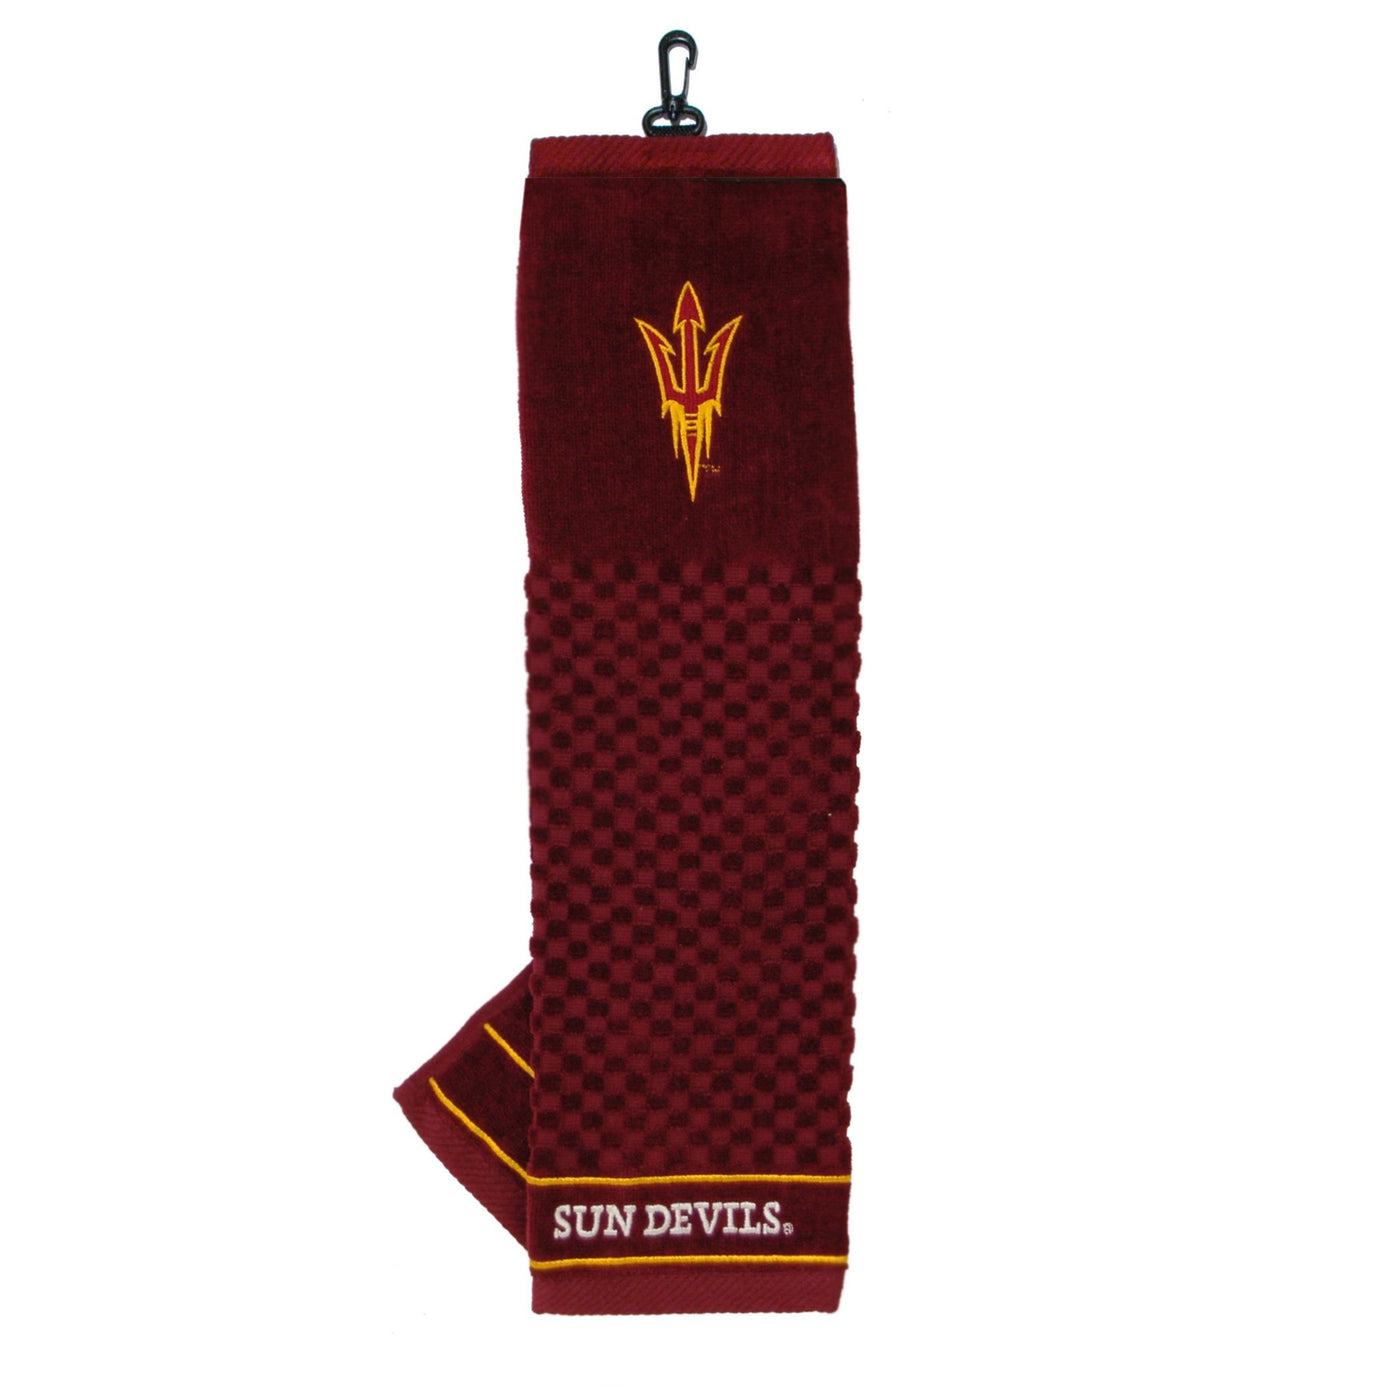 ASU maroon golf towel with carabiner at the top and embroidered pitchfork with 'Sun Devils' at the bottom